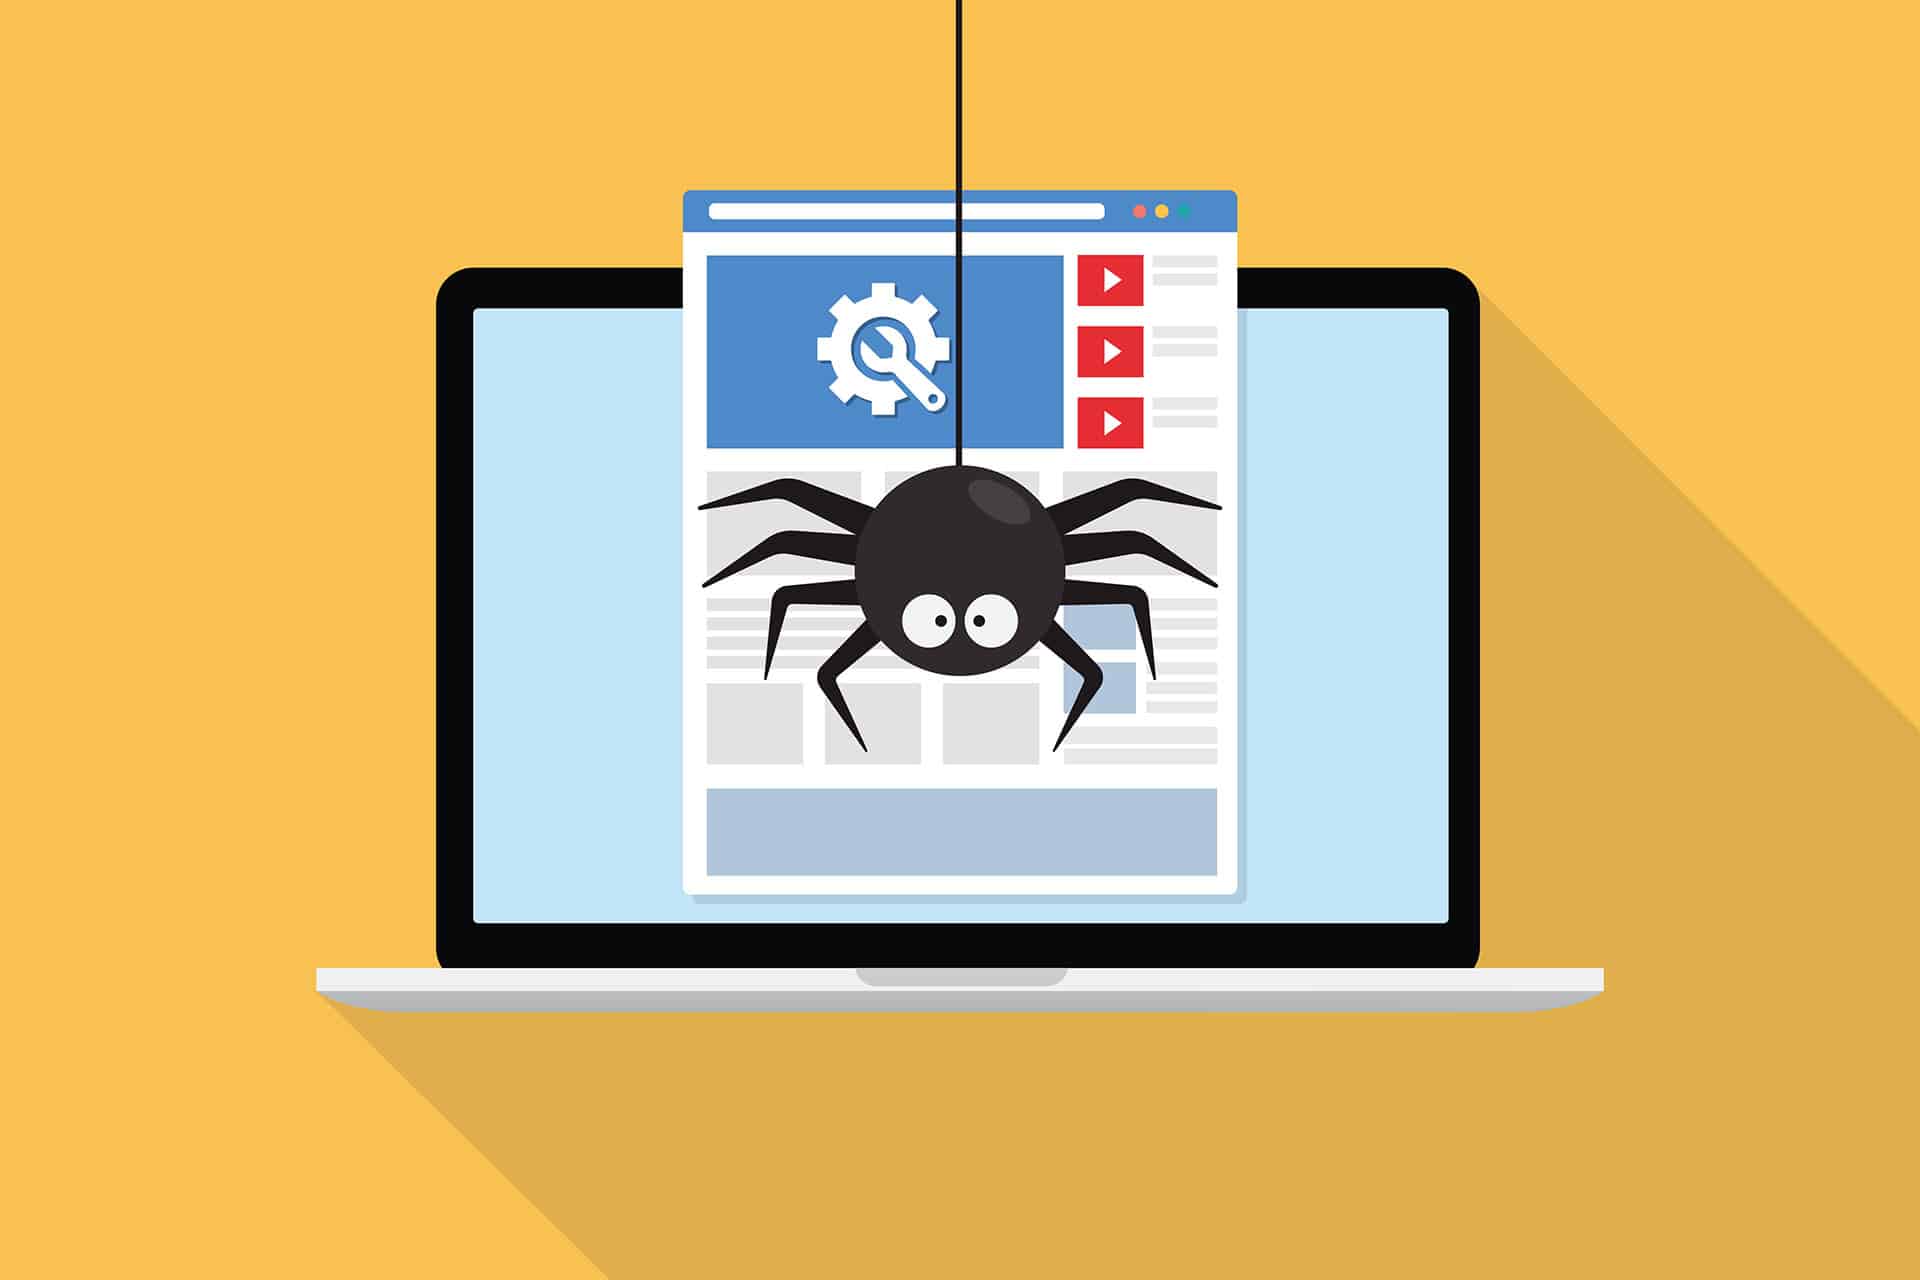 Black spider hanging from web, posing as web crawler in front of labtop